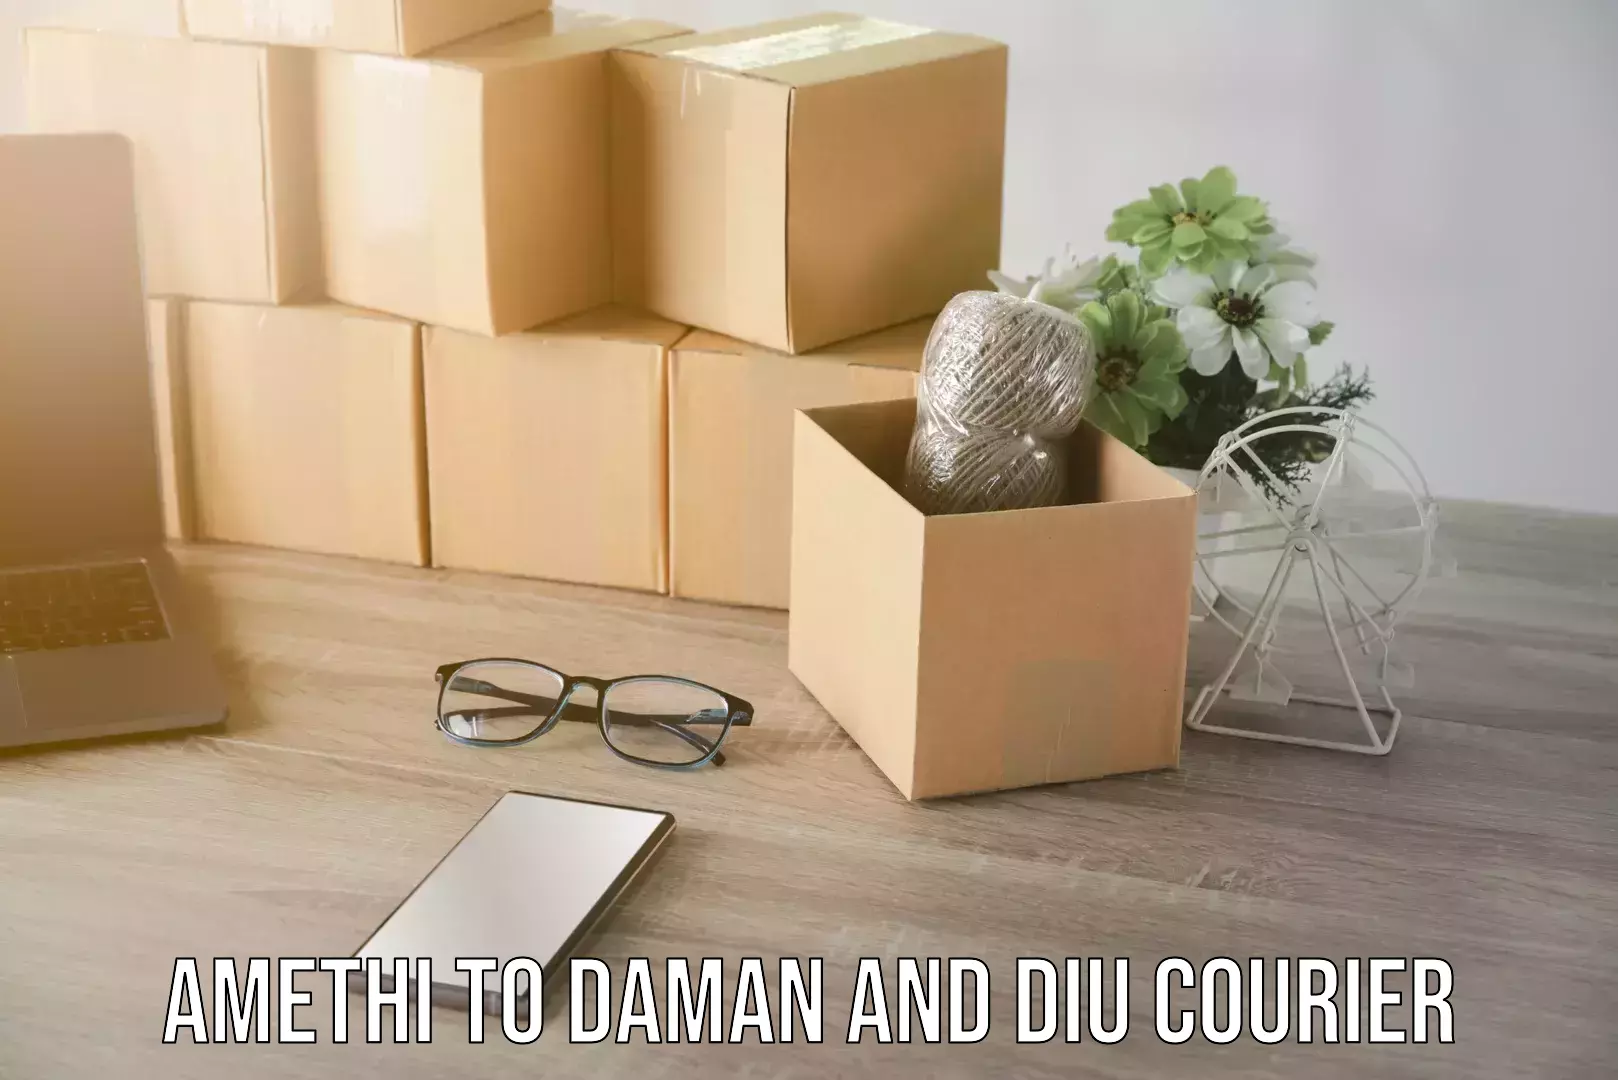 High-priority parcel service Amethi to Daman and Diu